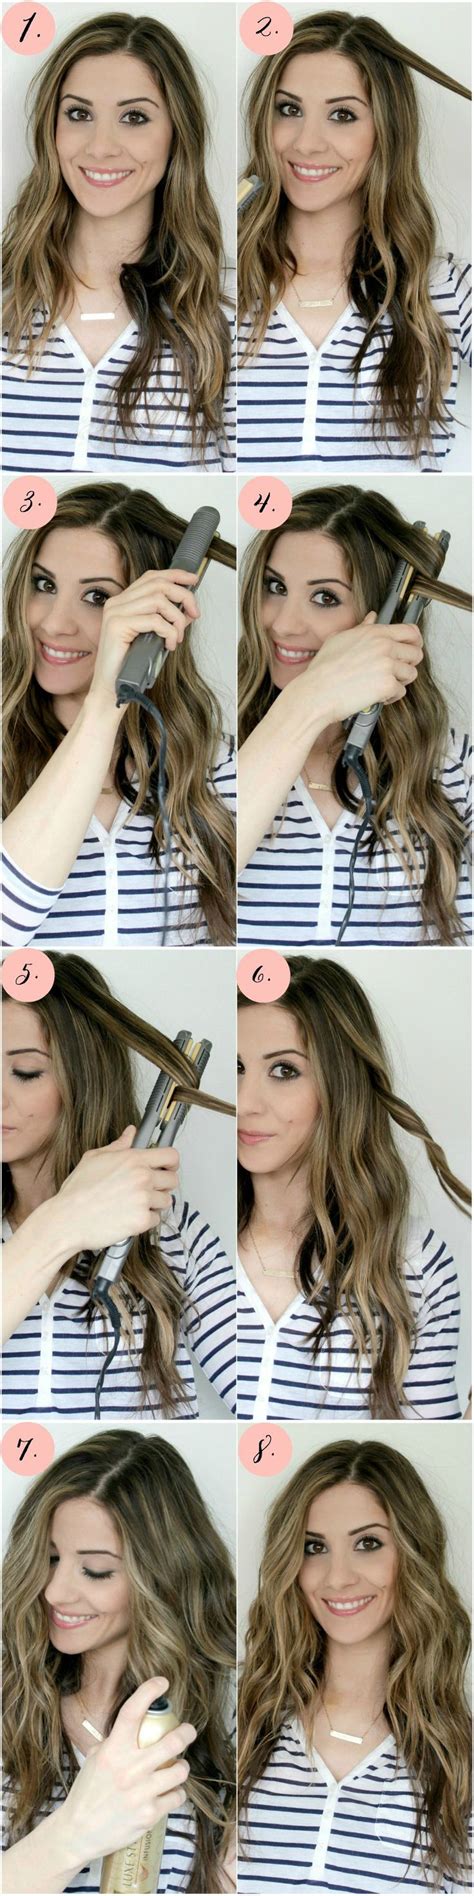 How To Use Flat Iron On Fine Hair Tips Tricks And Hair Care Best